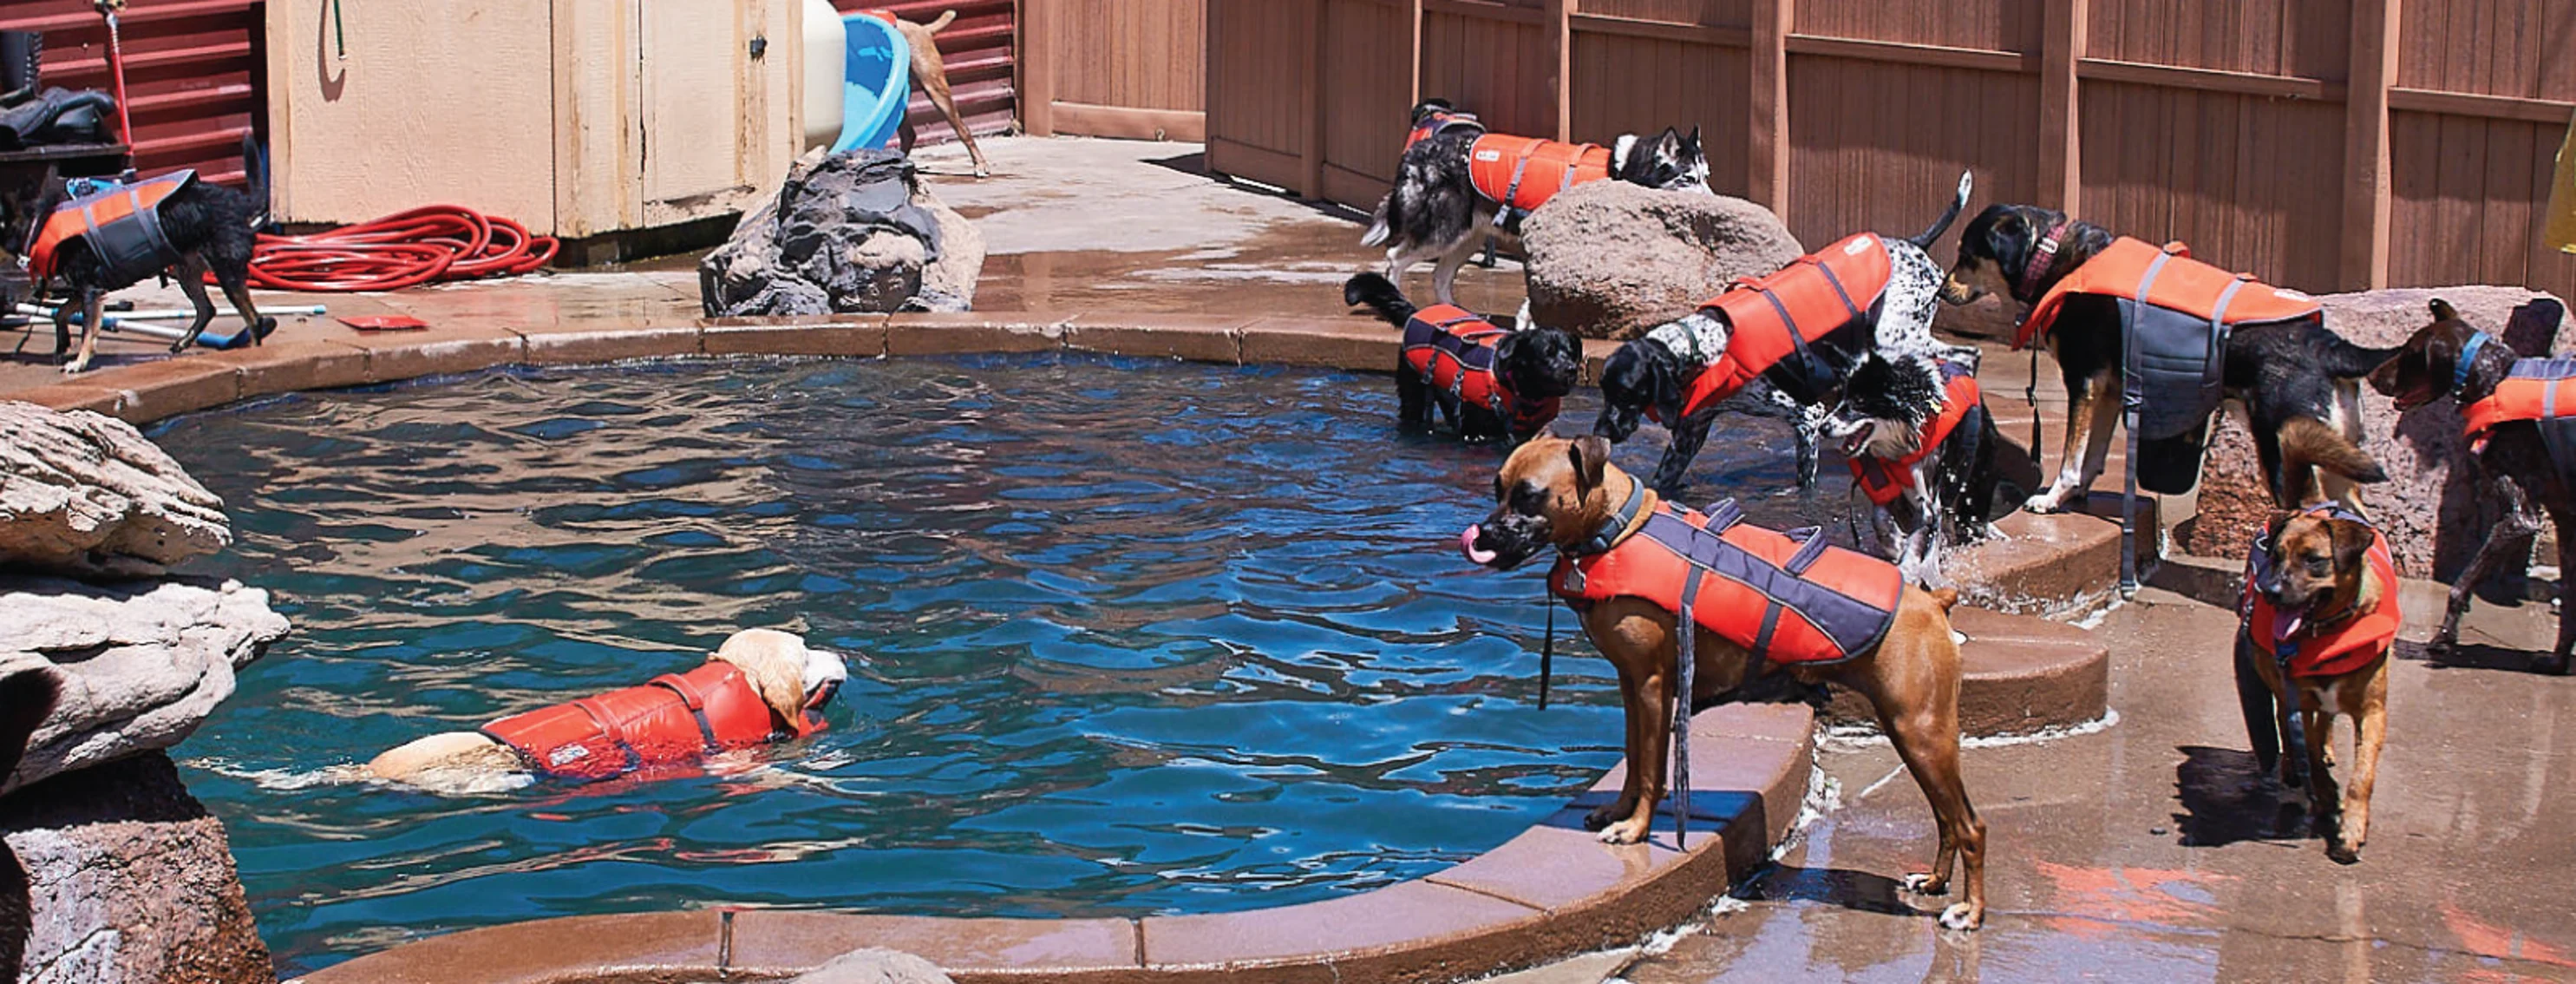 Dogs in pool area at Denver City Bark